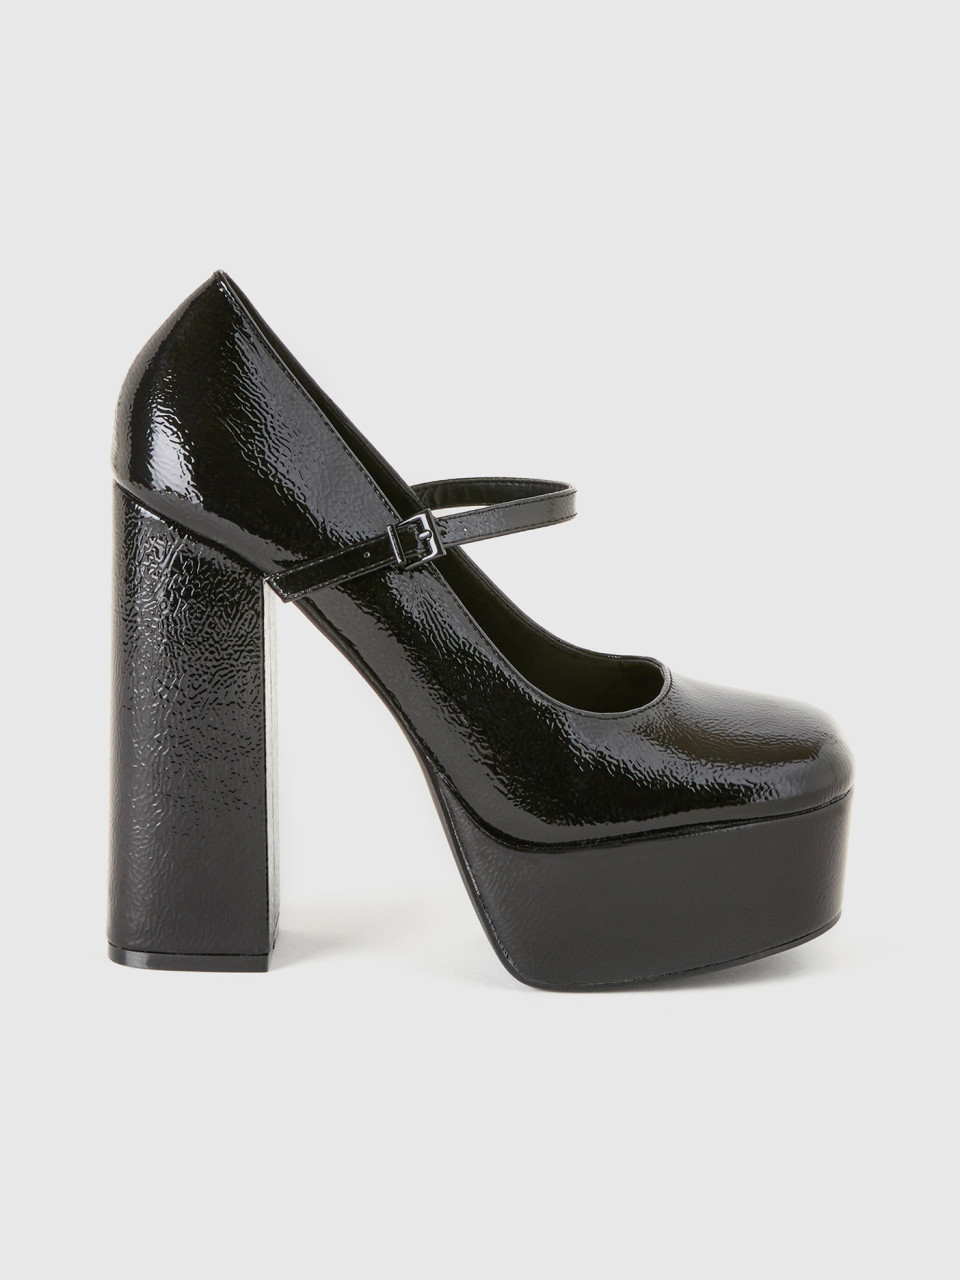 Benetton, Glossy Pumps With Heel And Buckle, Black, Women